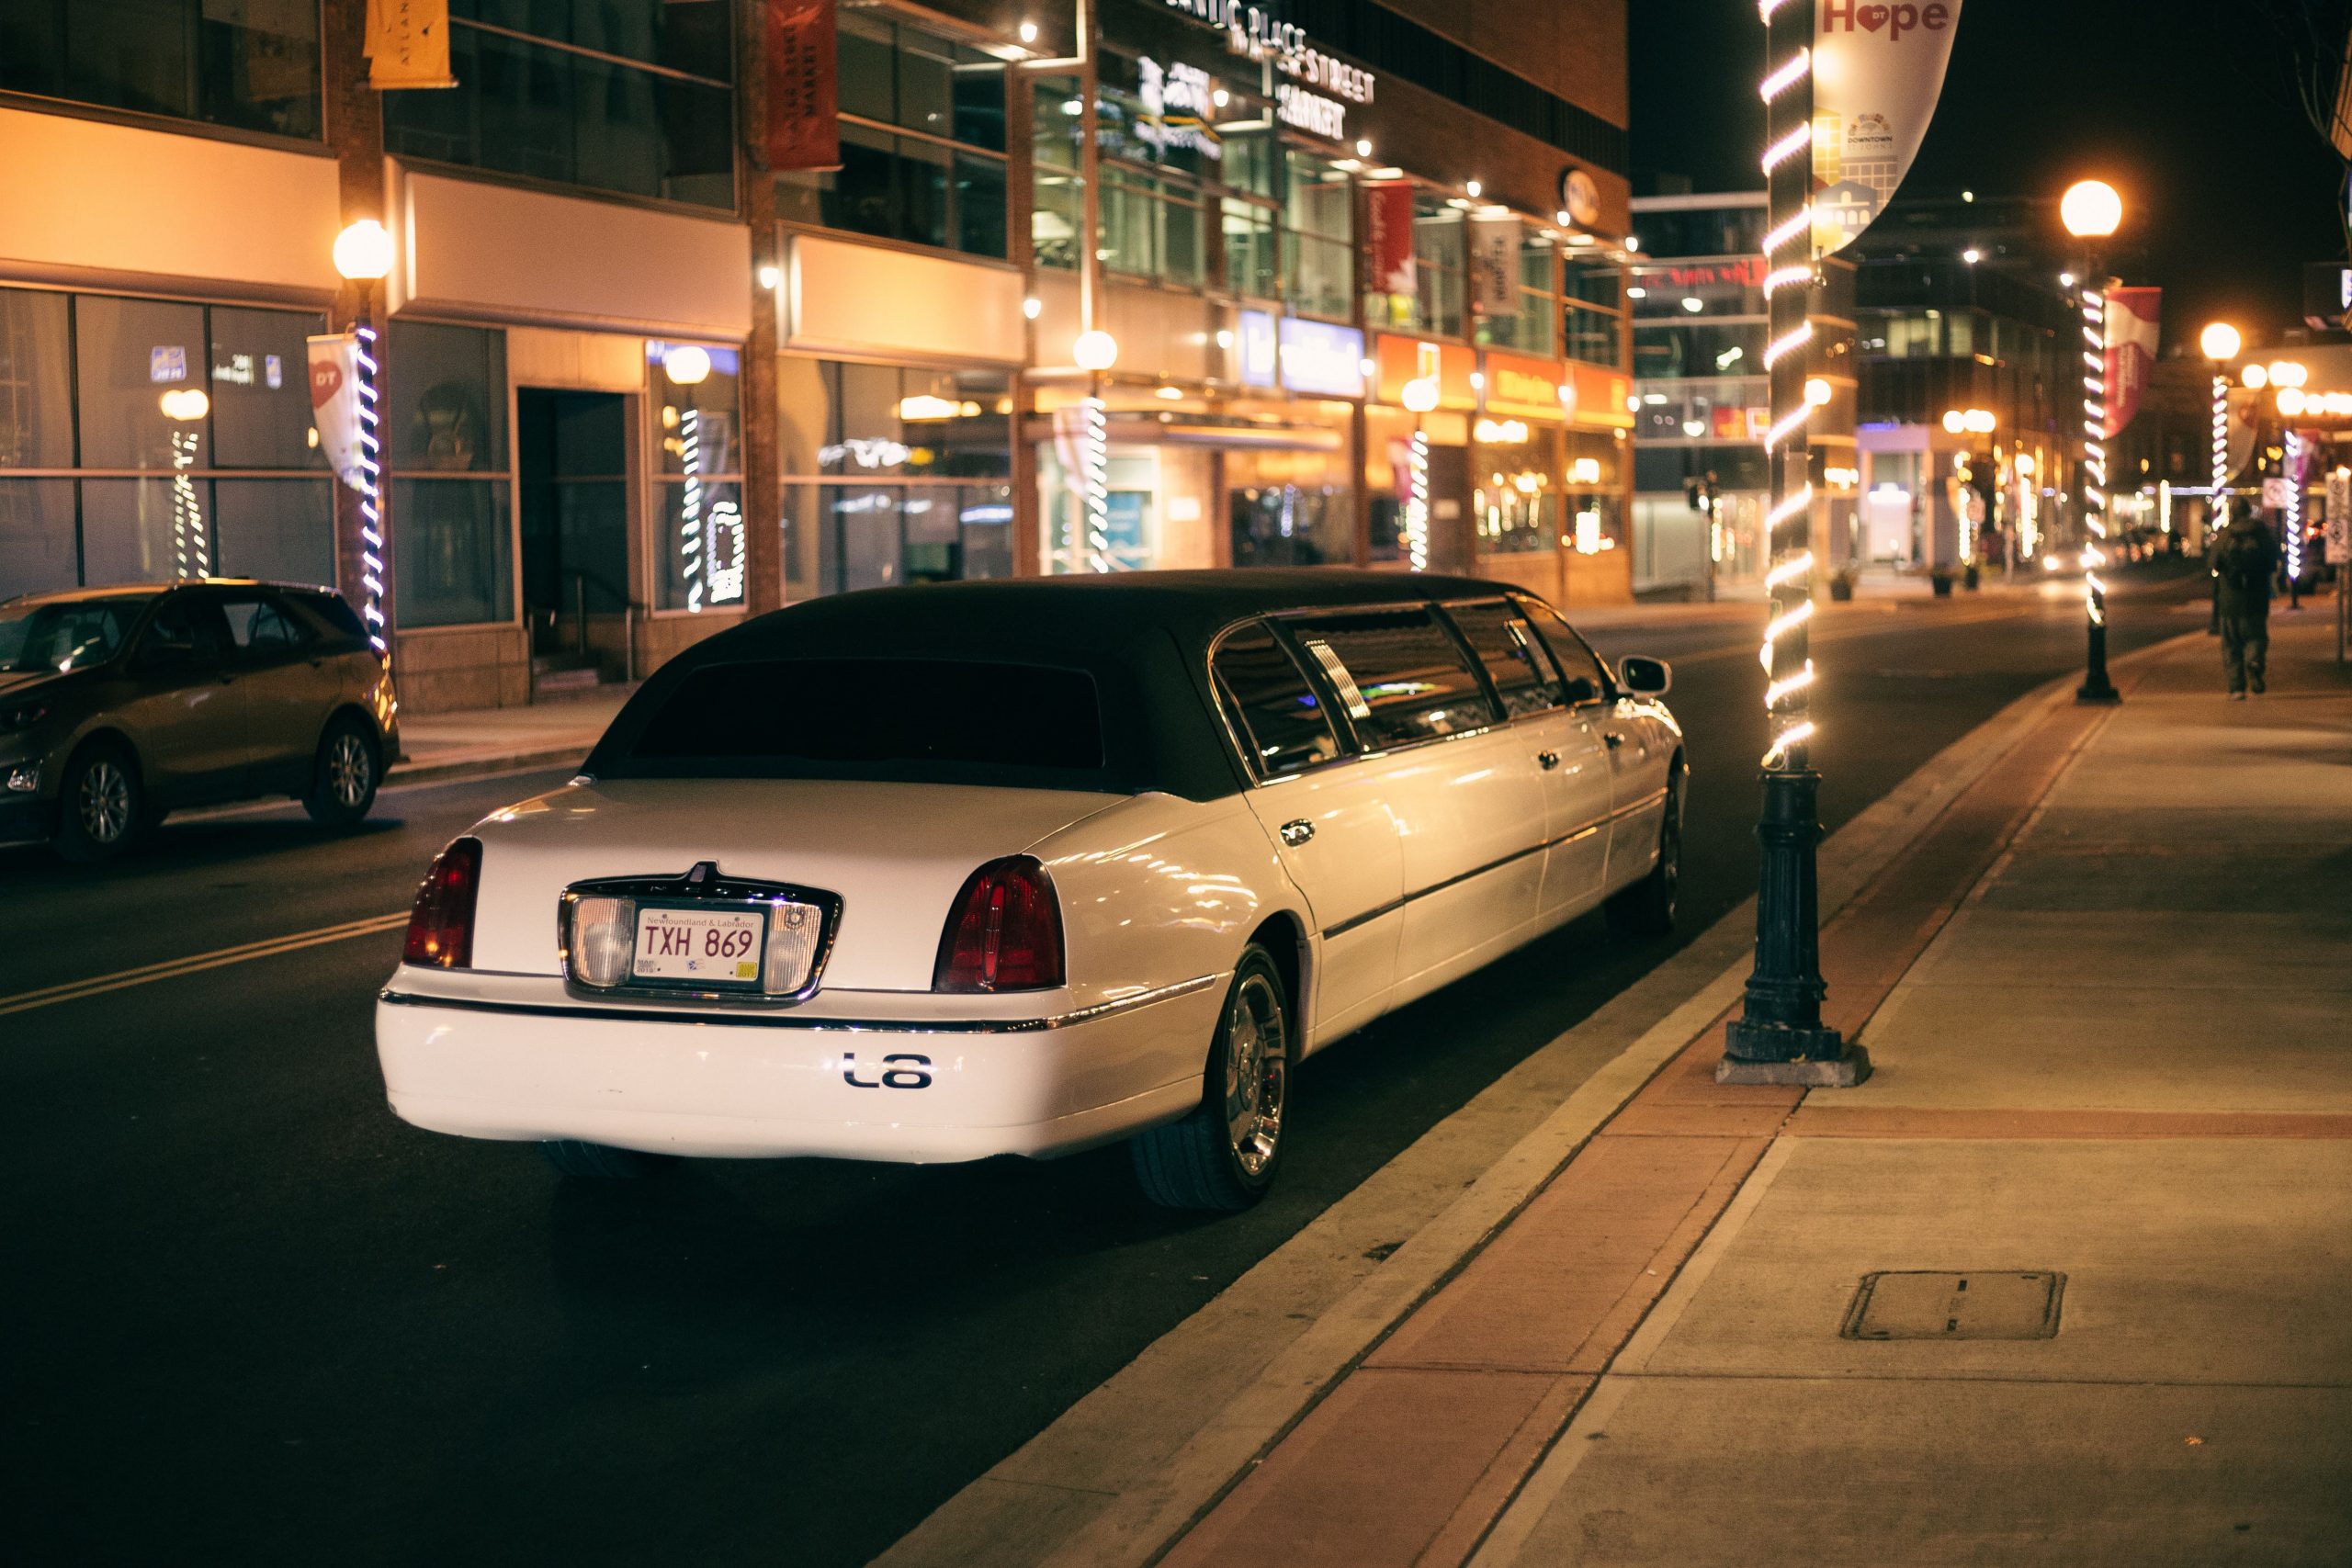 Top 5 Reasons to Book a Limo for Your Next Barrie Night Out